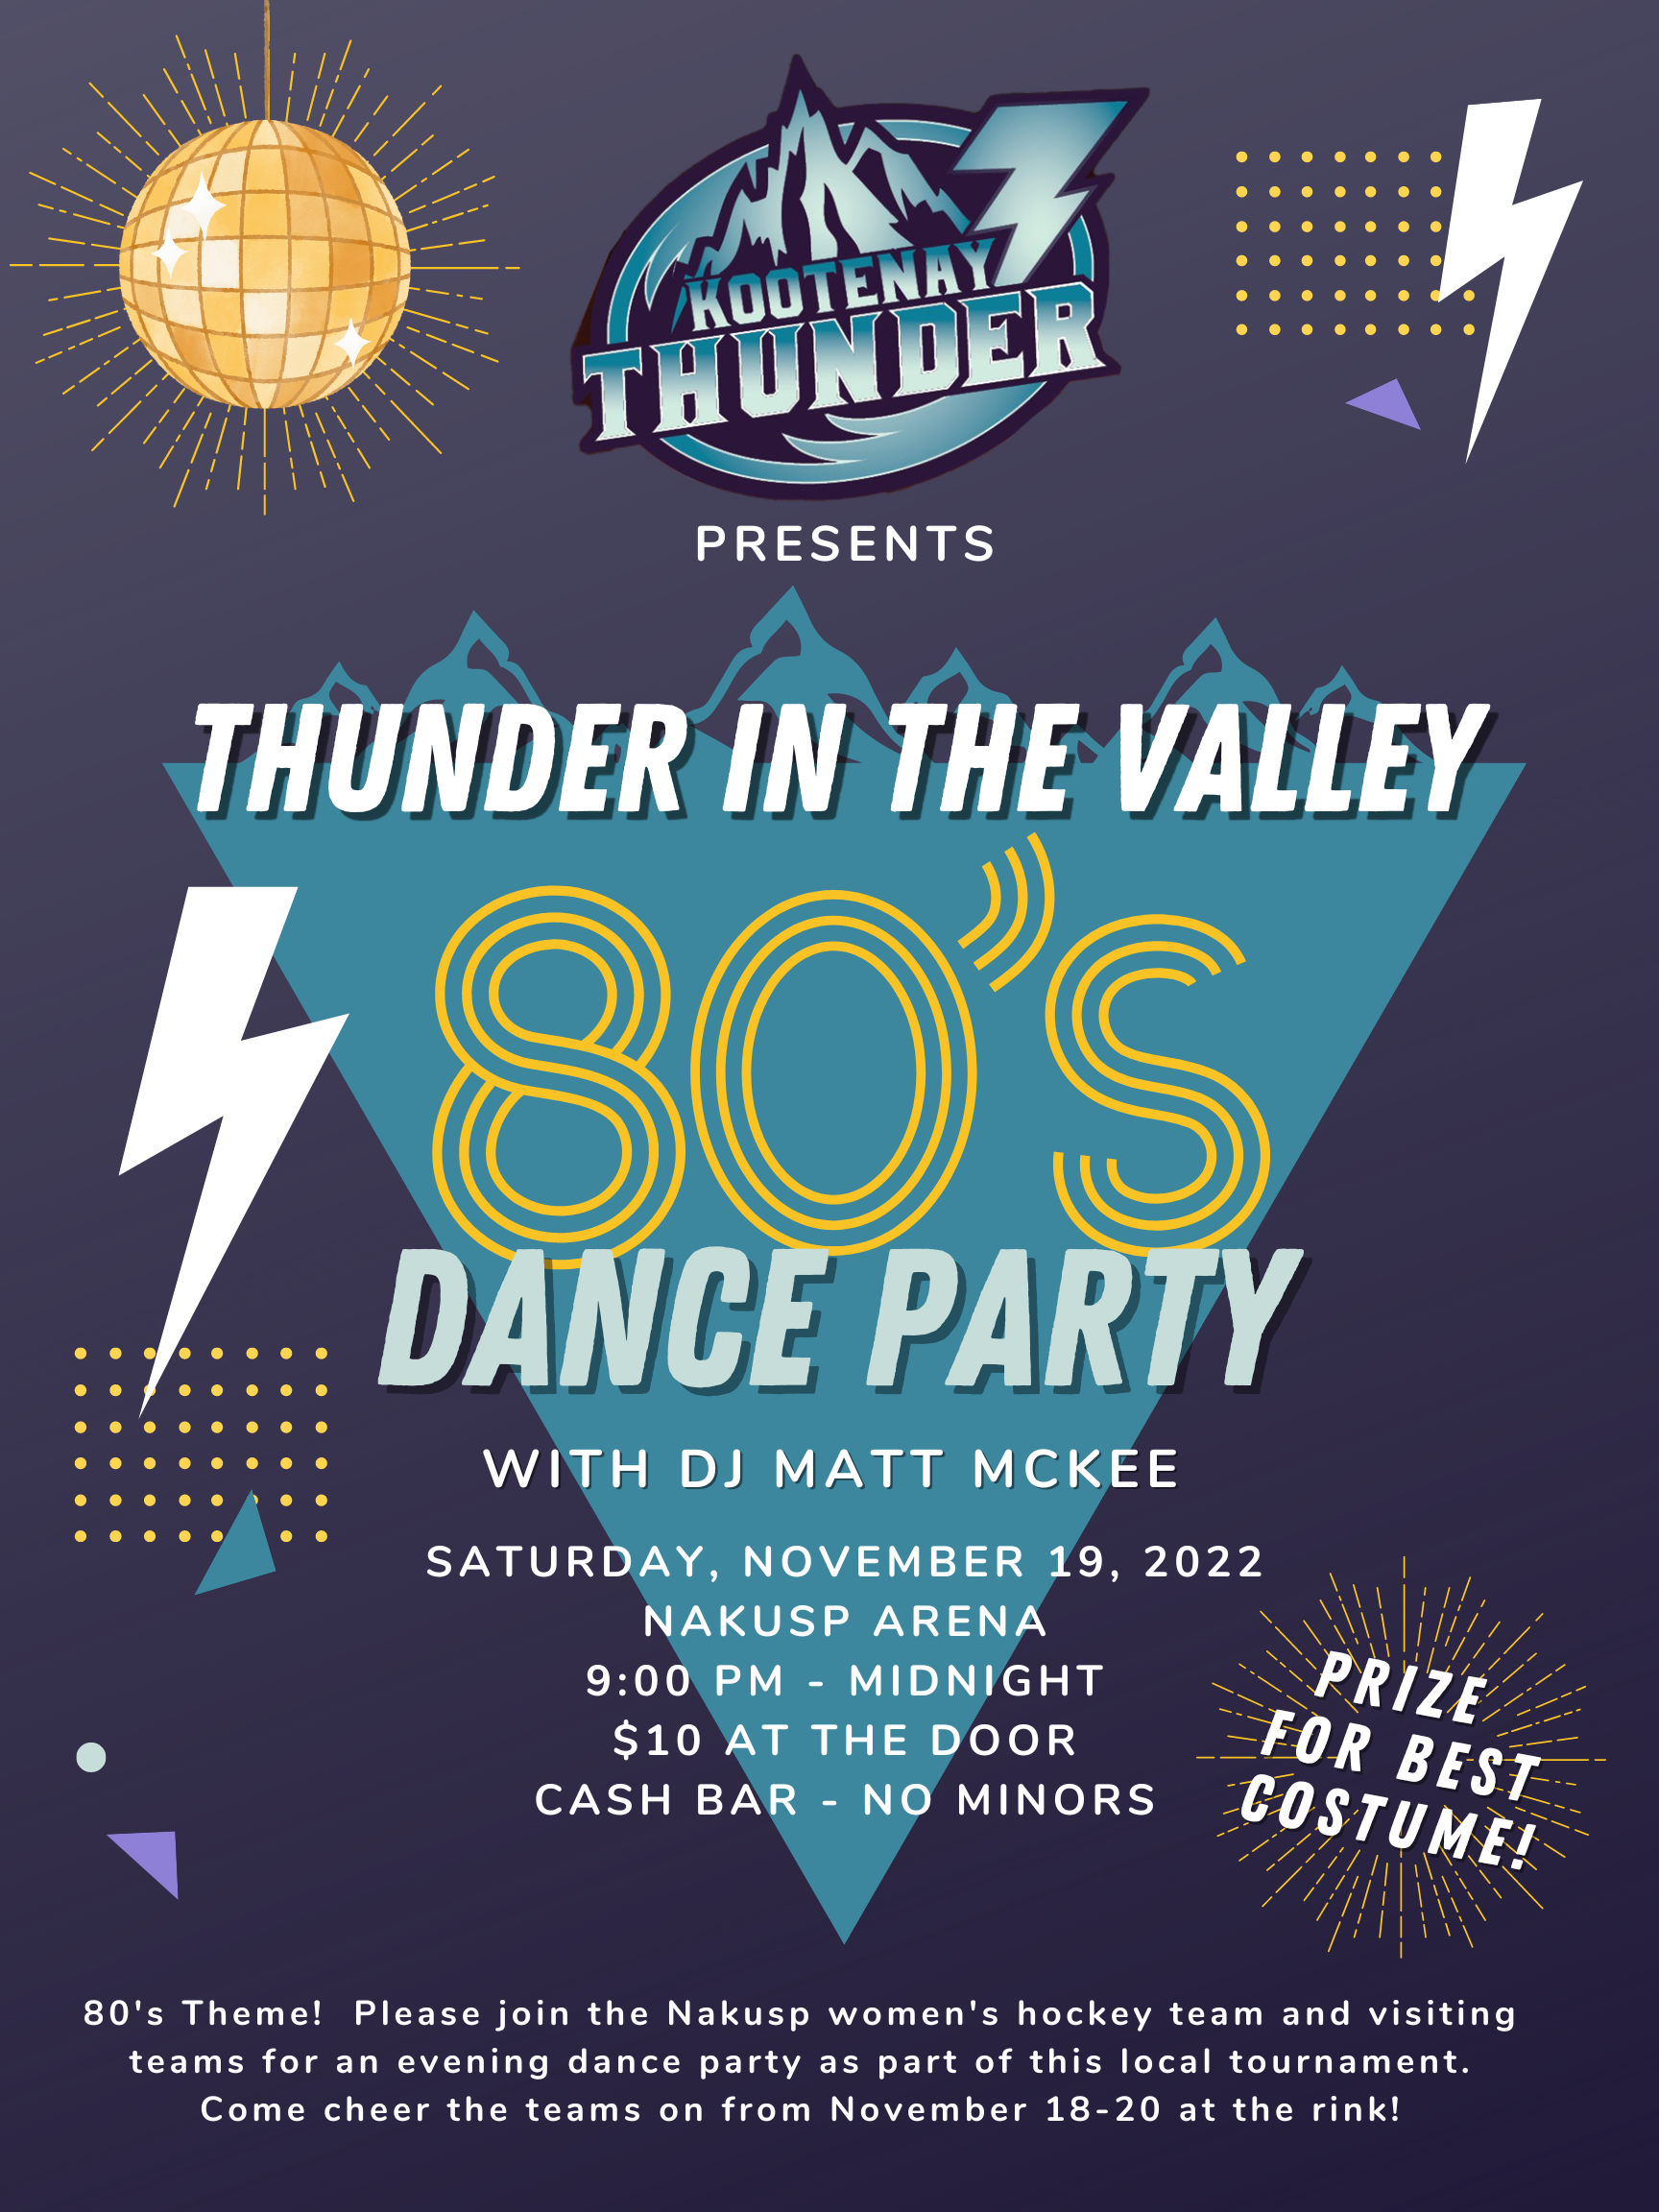 THUNDER IN THE VALLEY(1)-1